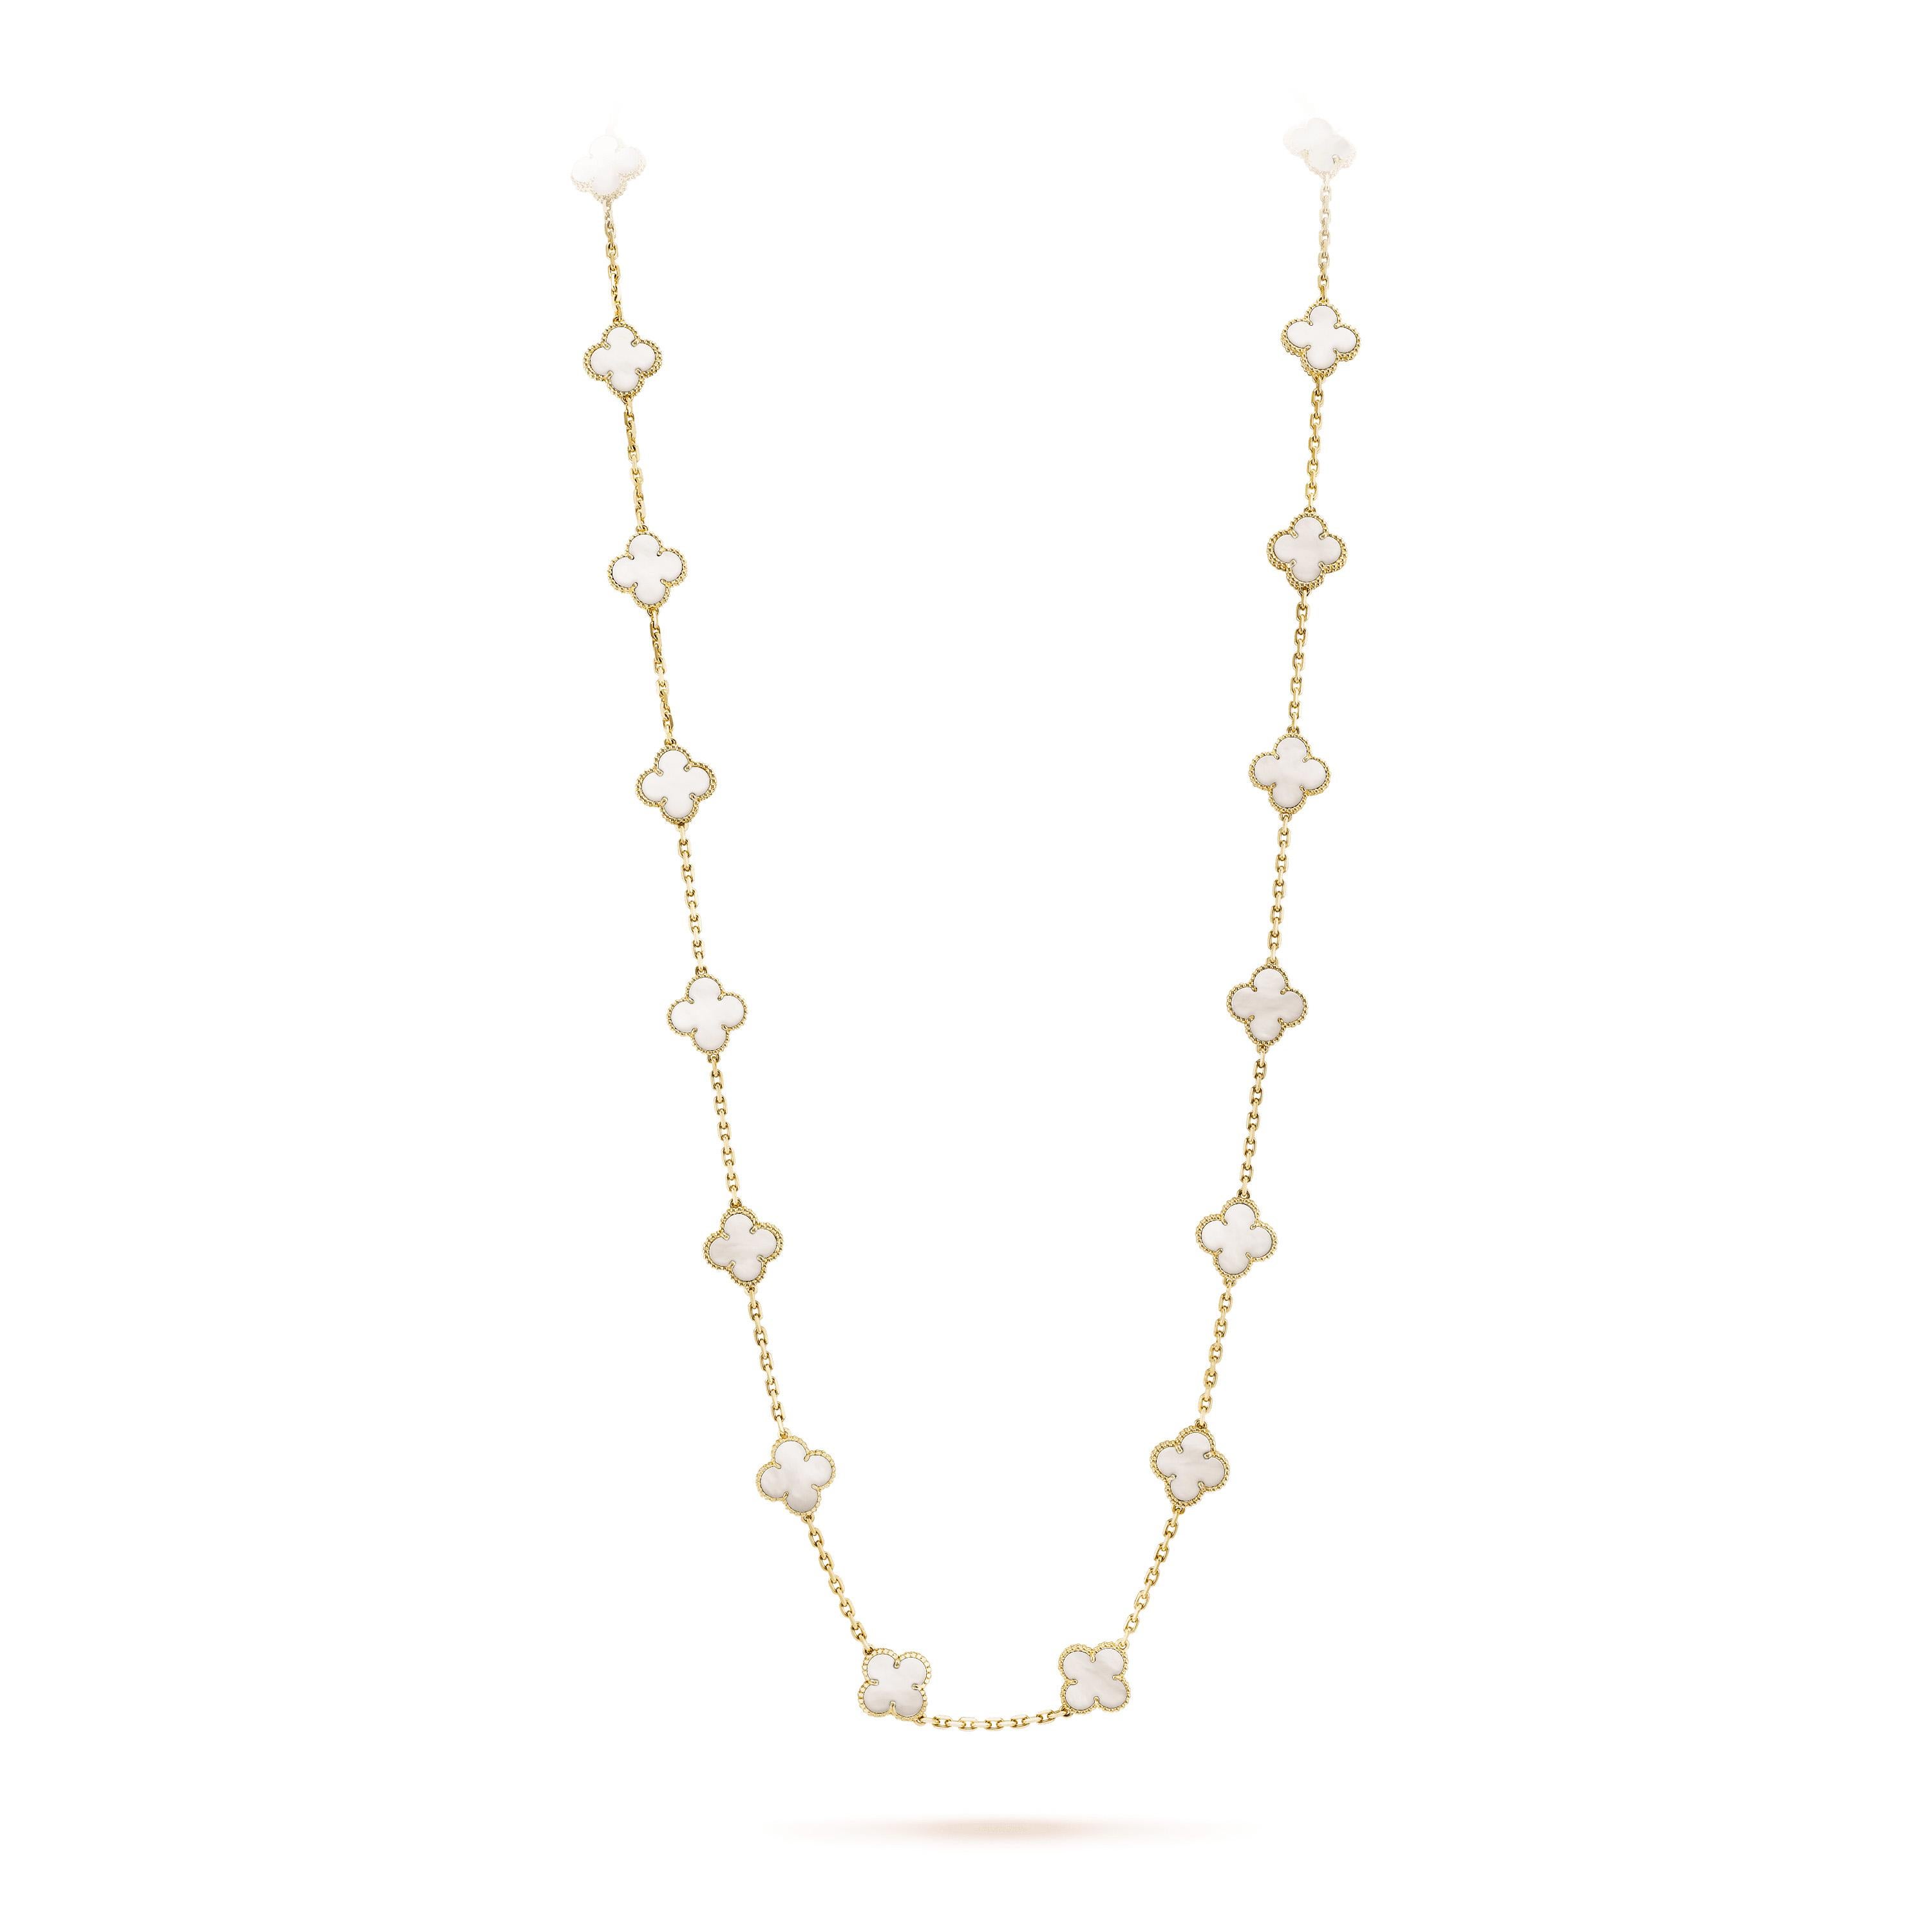 The Iconic Van Cleef & Arpels Alhambra charm is a simplified four-leaf clover motif that resonated with the house codes of nature and good luck, equally. 

Van Cleef & Arpels yellow gold and mother-of-pearl necklace
Lobster claw fastening
Twenty